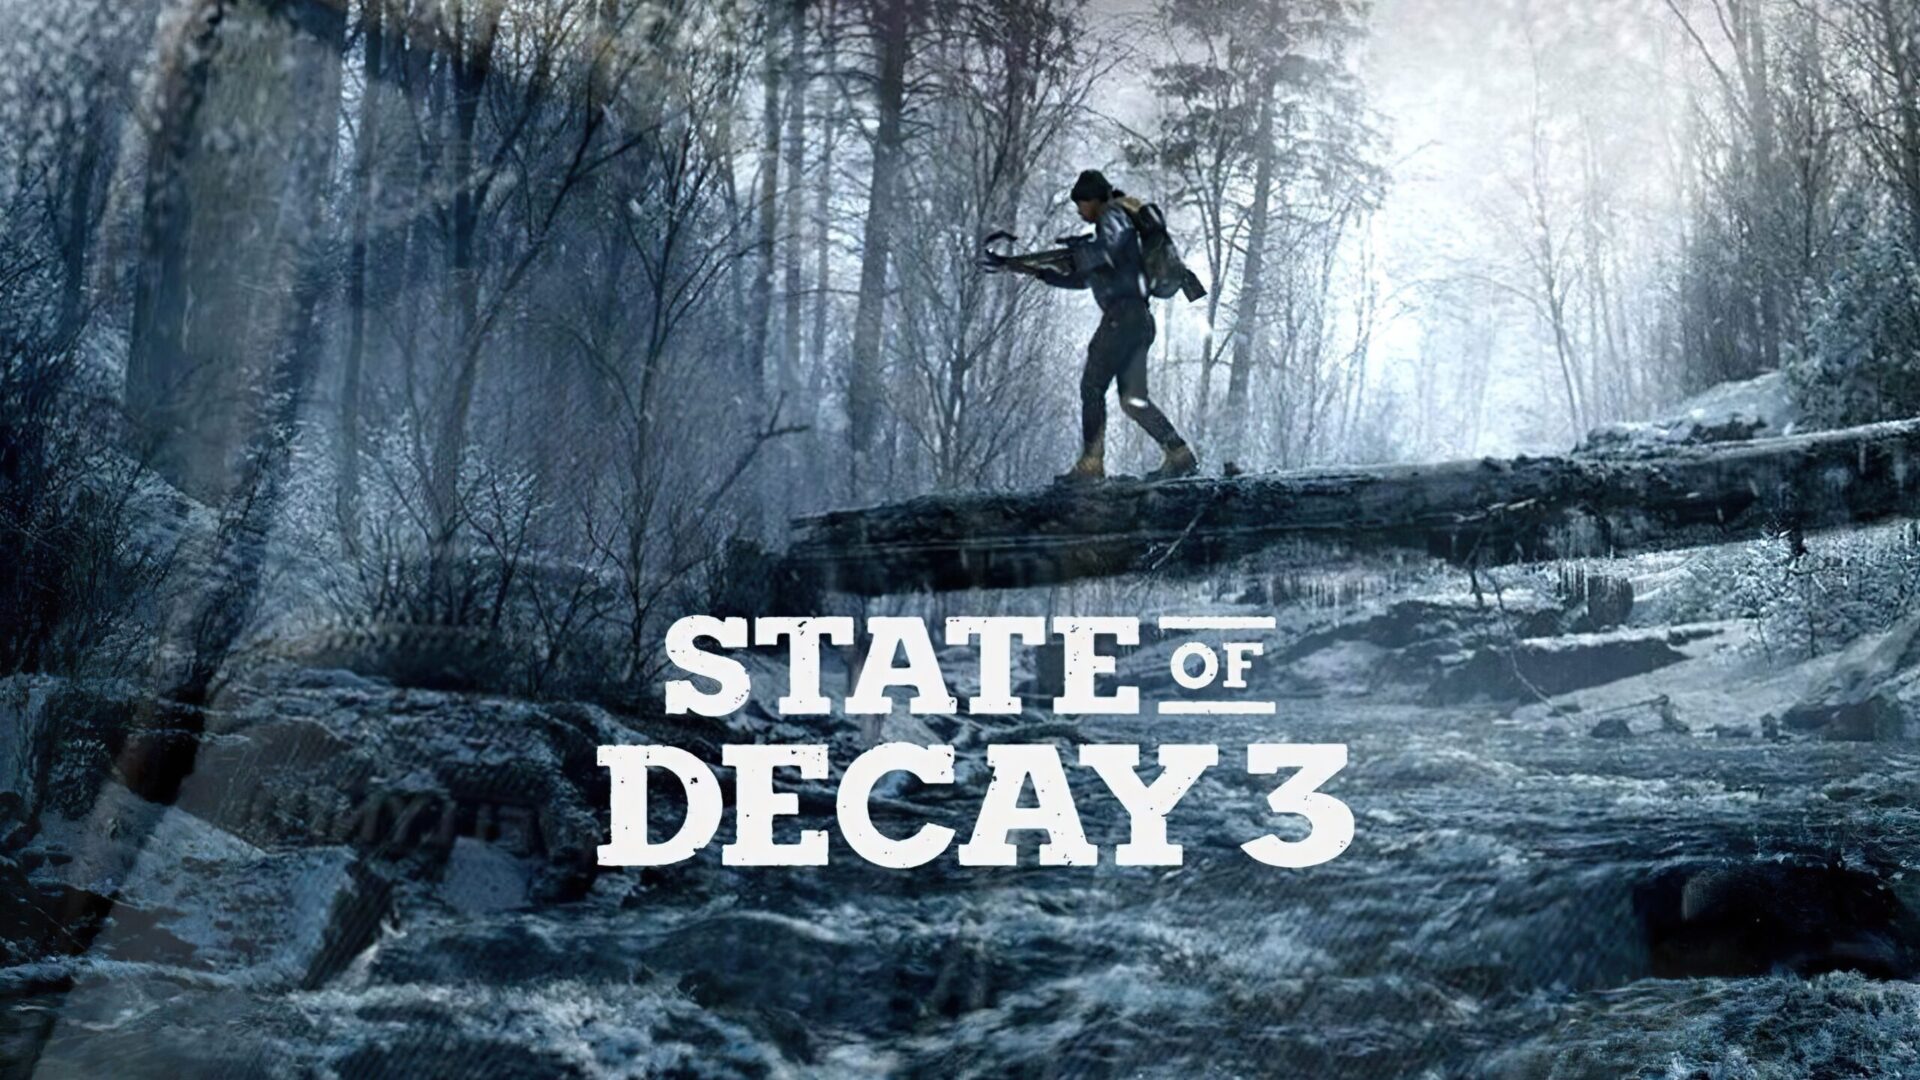 State of Decay 3's Winter Weather Adds New Elements to the